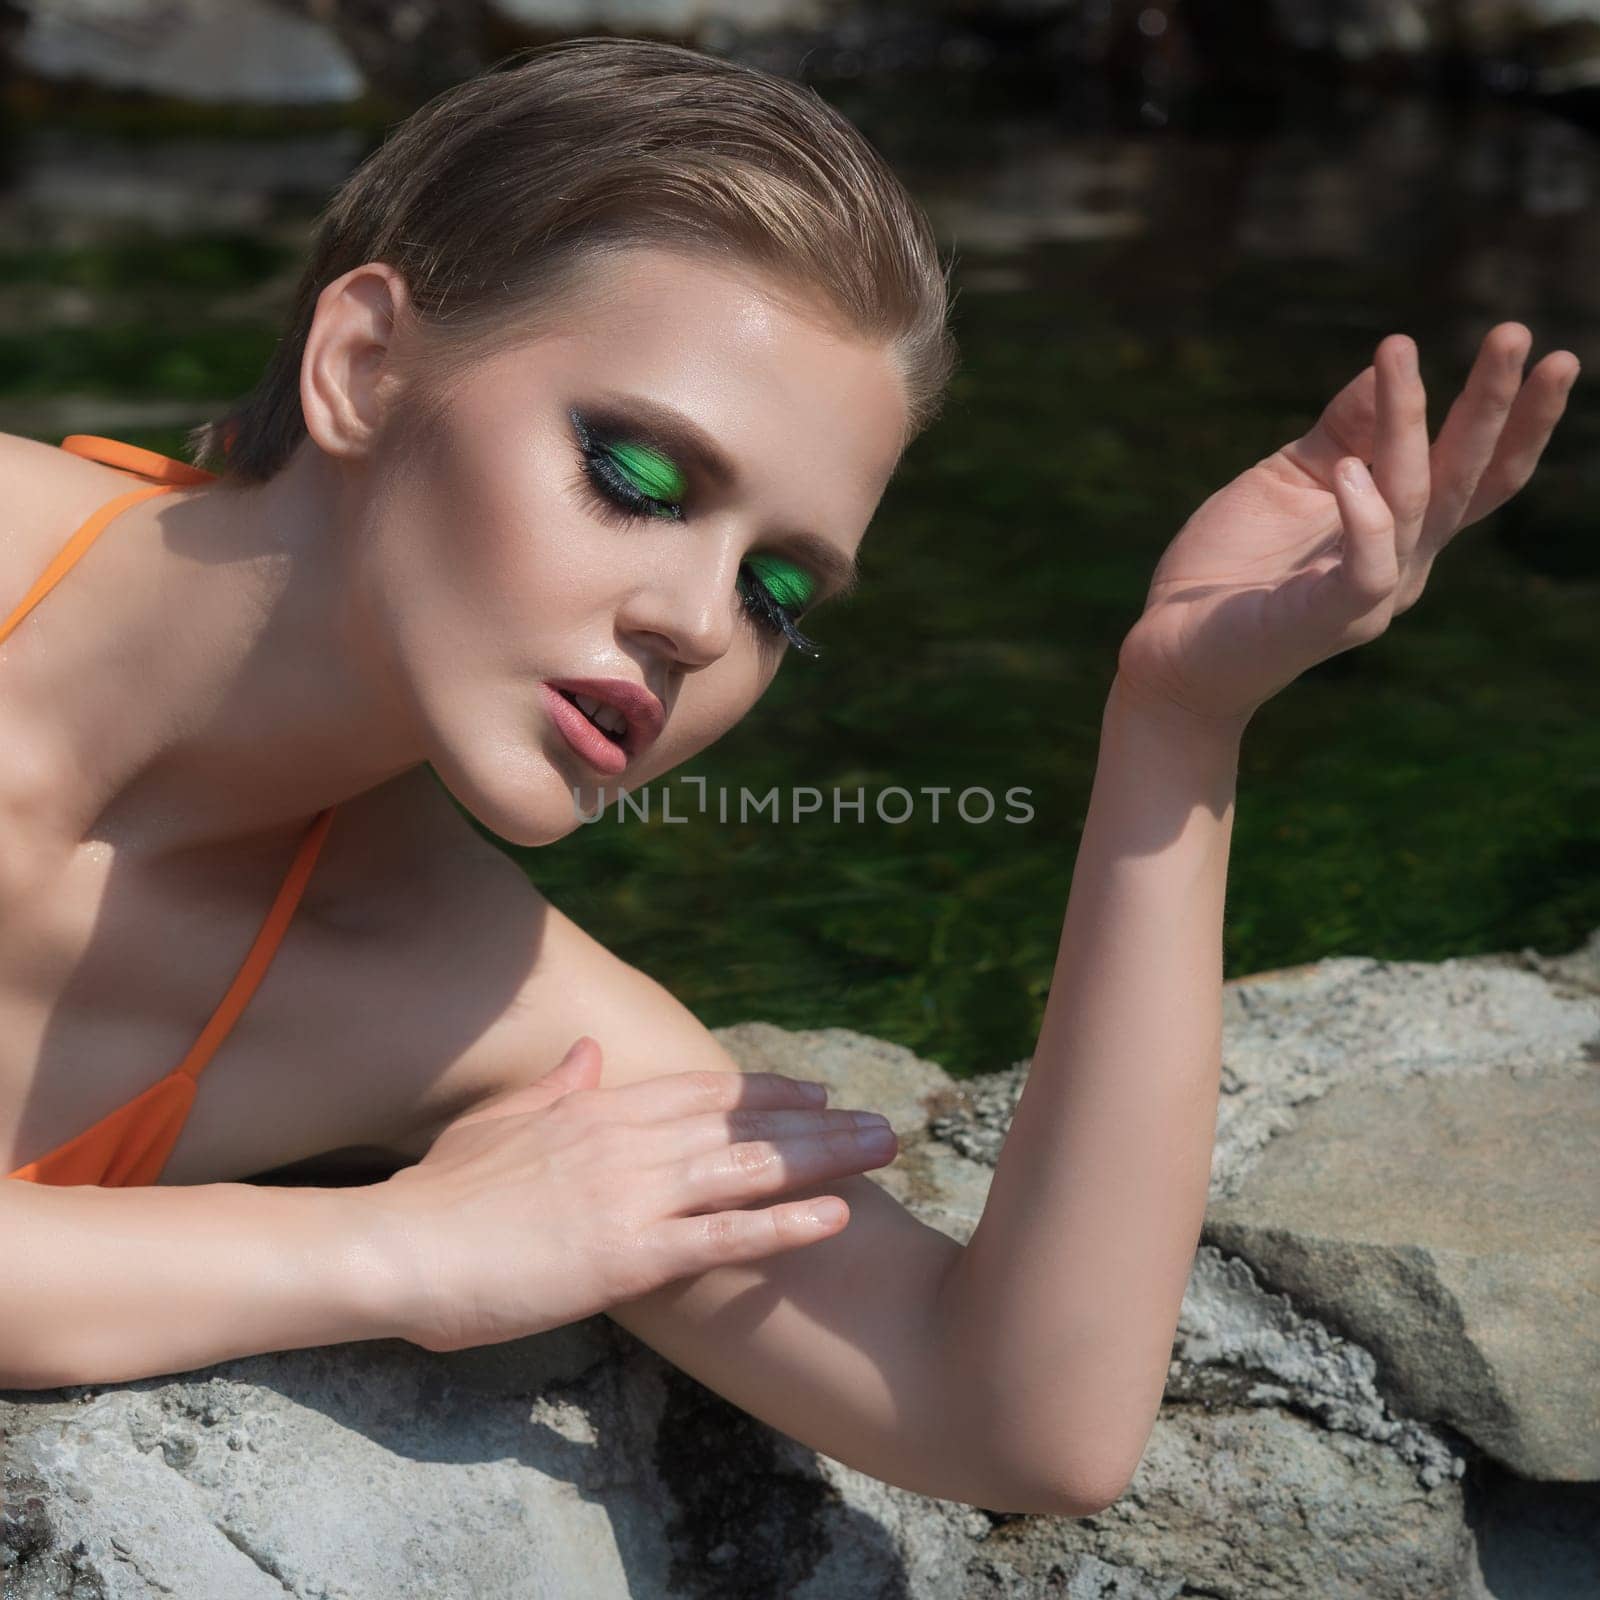 Adult woman with closed eyes and bright makeup poses with her hands on the rocky edge of an outdoor pool filled with natural geothermal water. Fashionable female is dressed in an orange bikini top